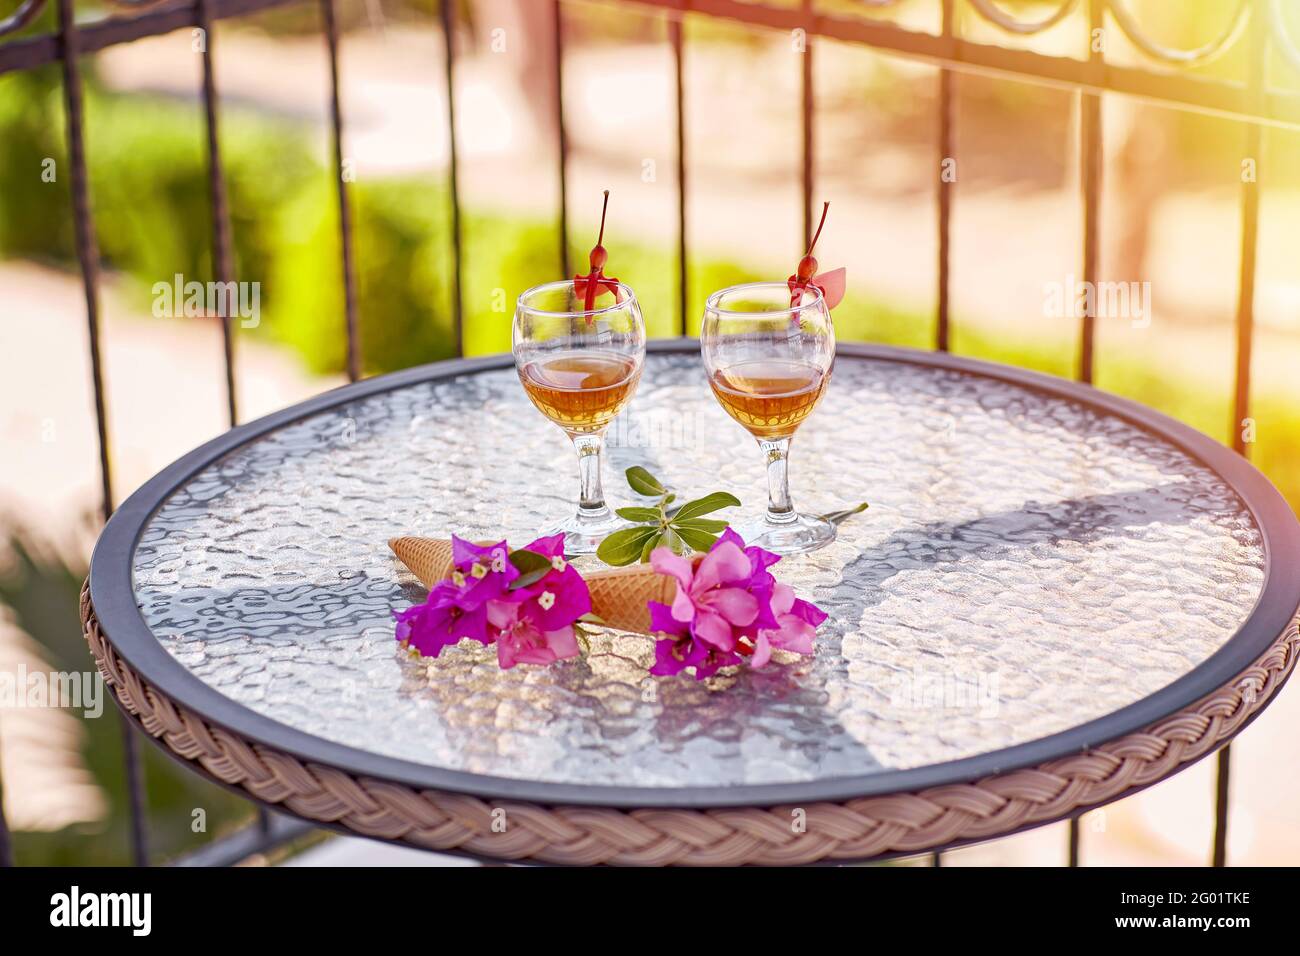 Summer aperitif of homemade cocktails with pink flowers of bougainvillea on glass table. Refreshment concept. Copy space. Summer bright surreal flowers and homemade drinks. Copy space. High quality Stock Photo